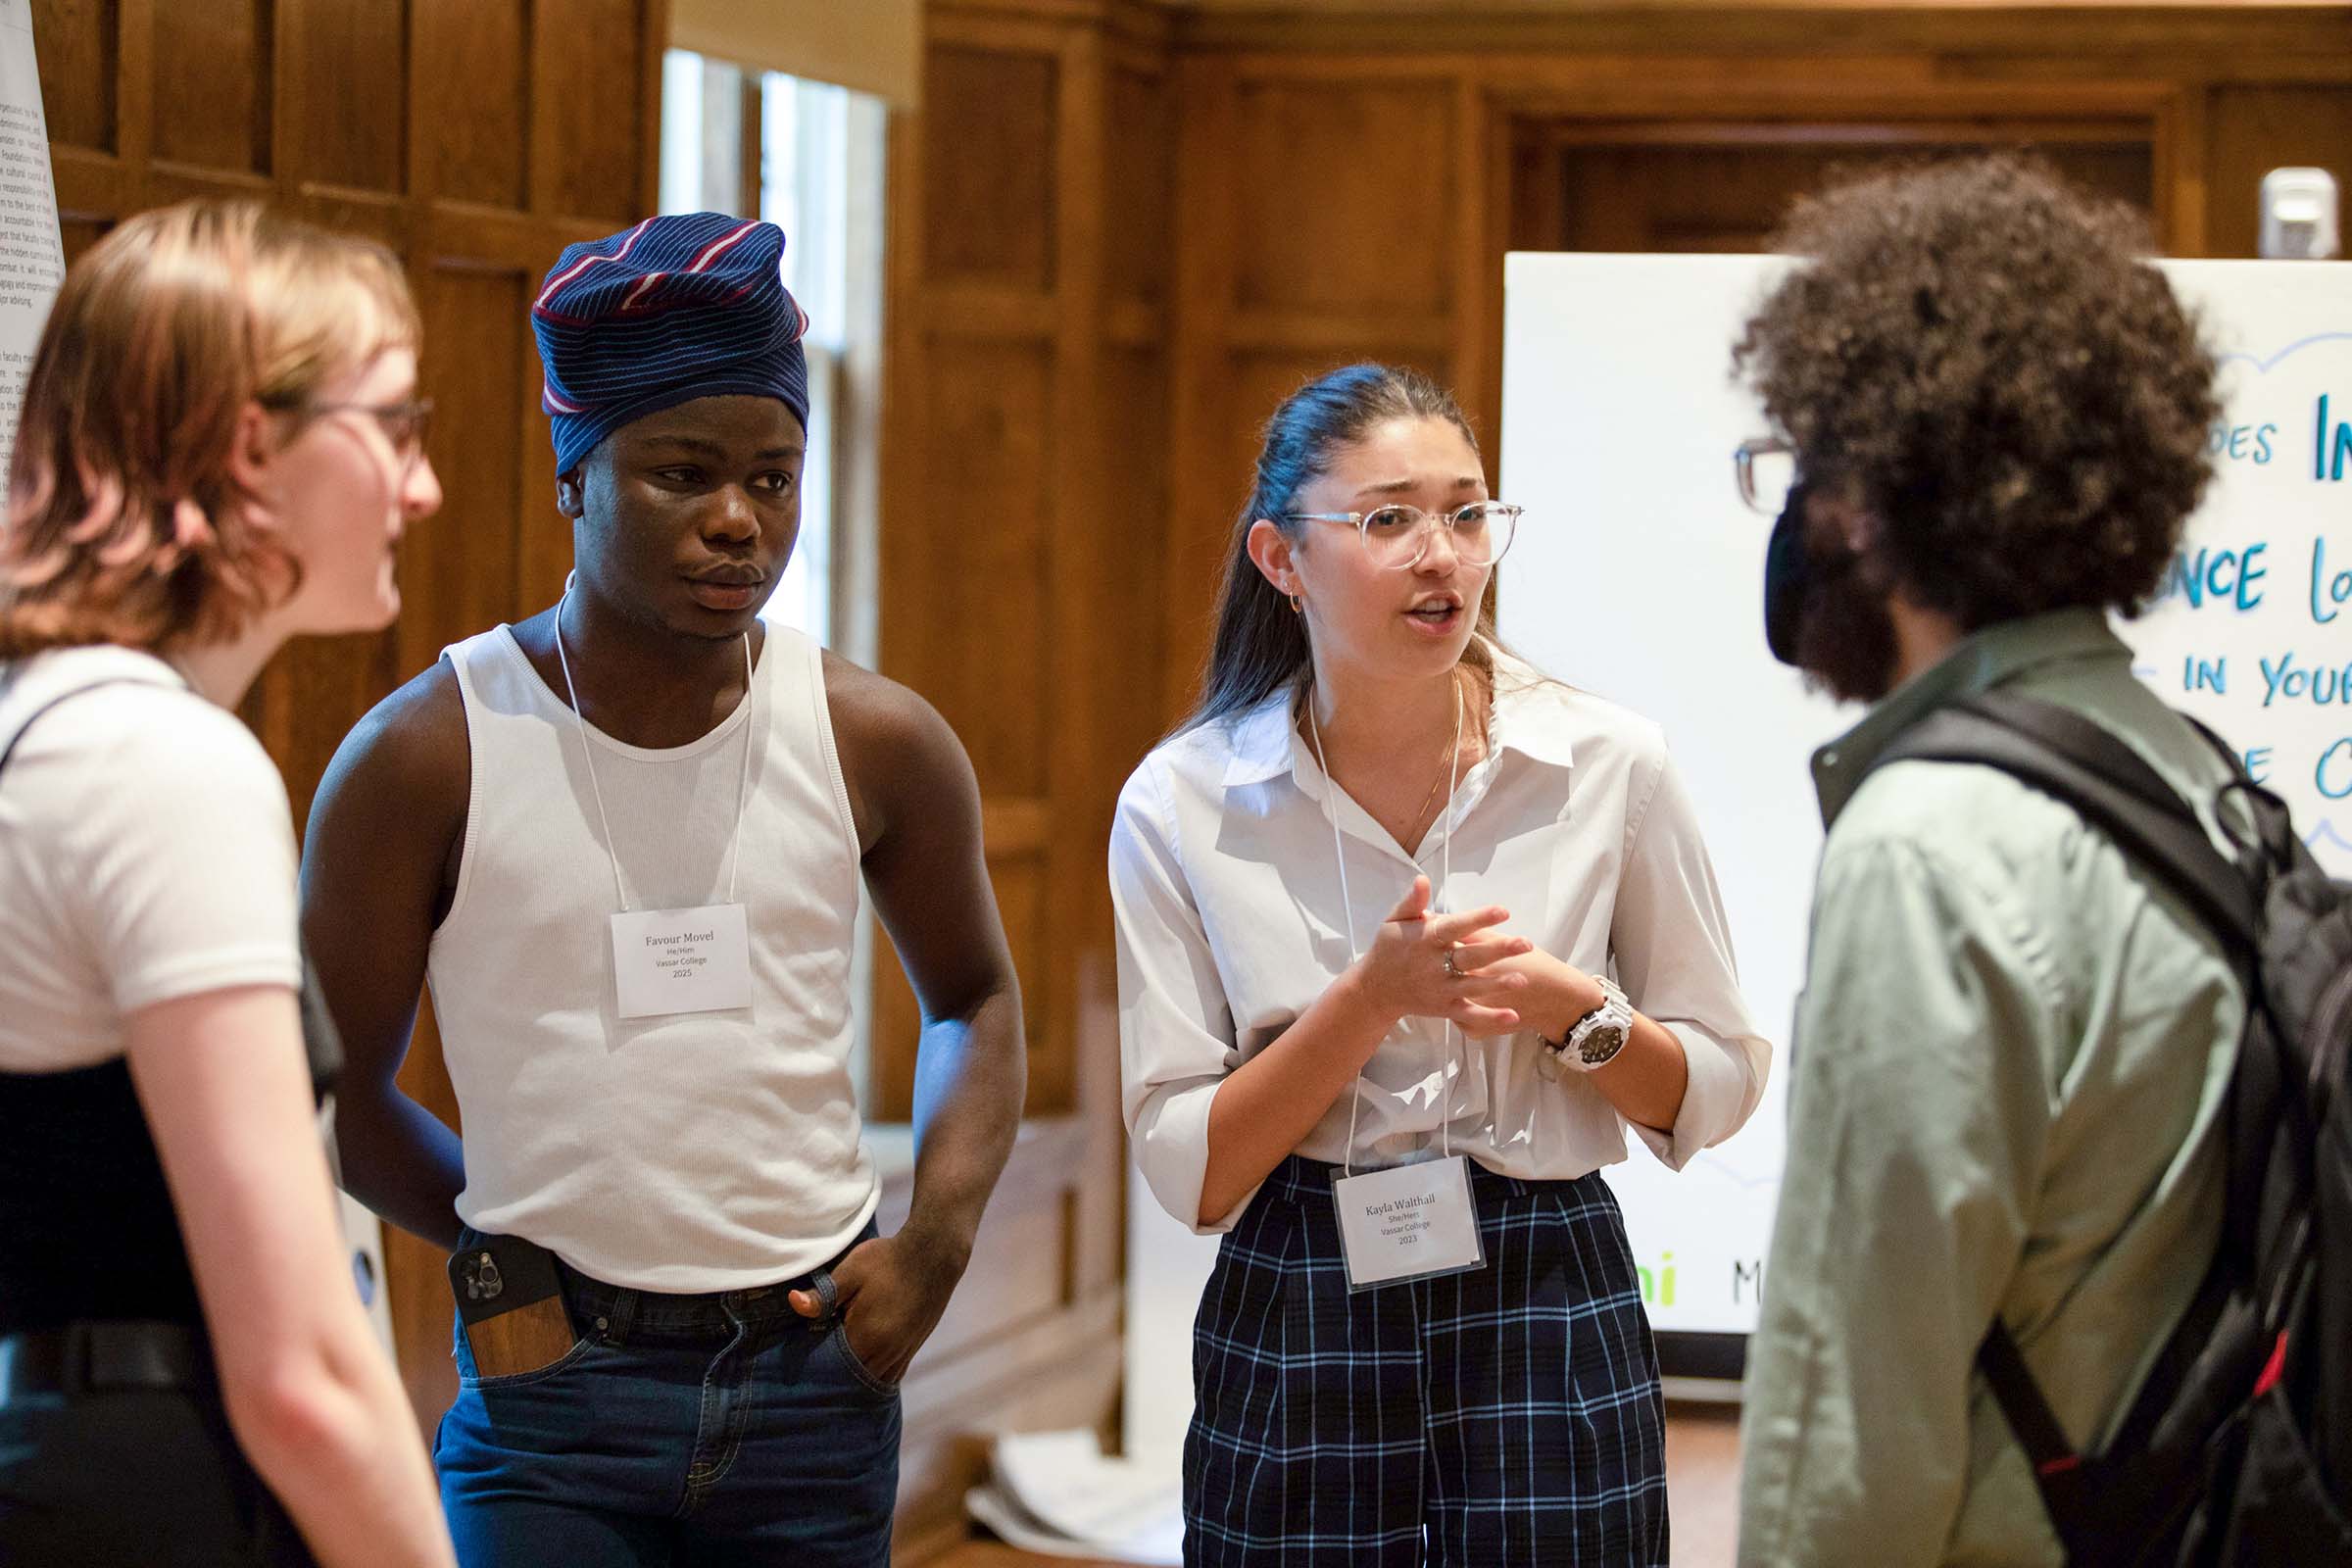 Vassar students (from left) Kali vom Eigen ’23, Favour Movel ’25 and Kayla Walthall ’23 share ideas with another student at the symposium.